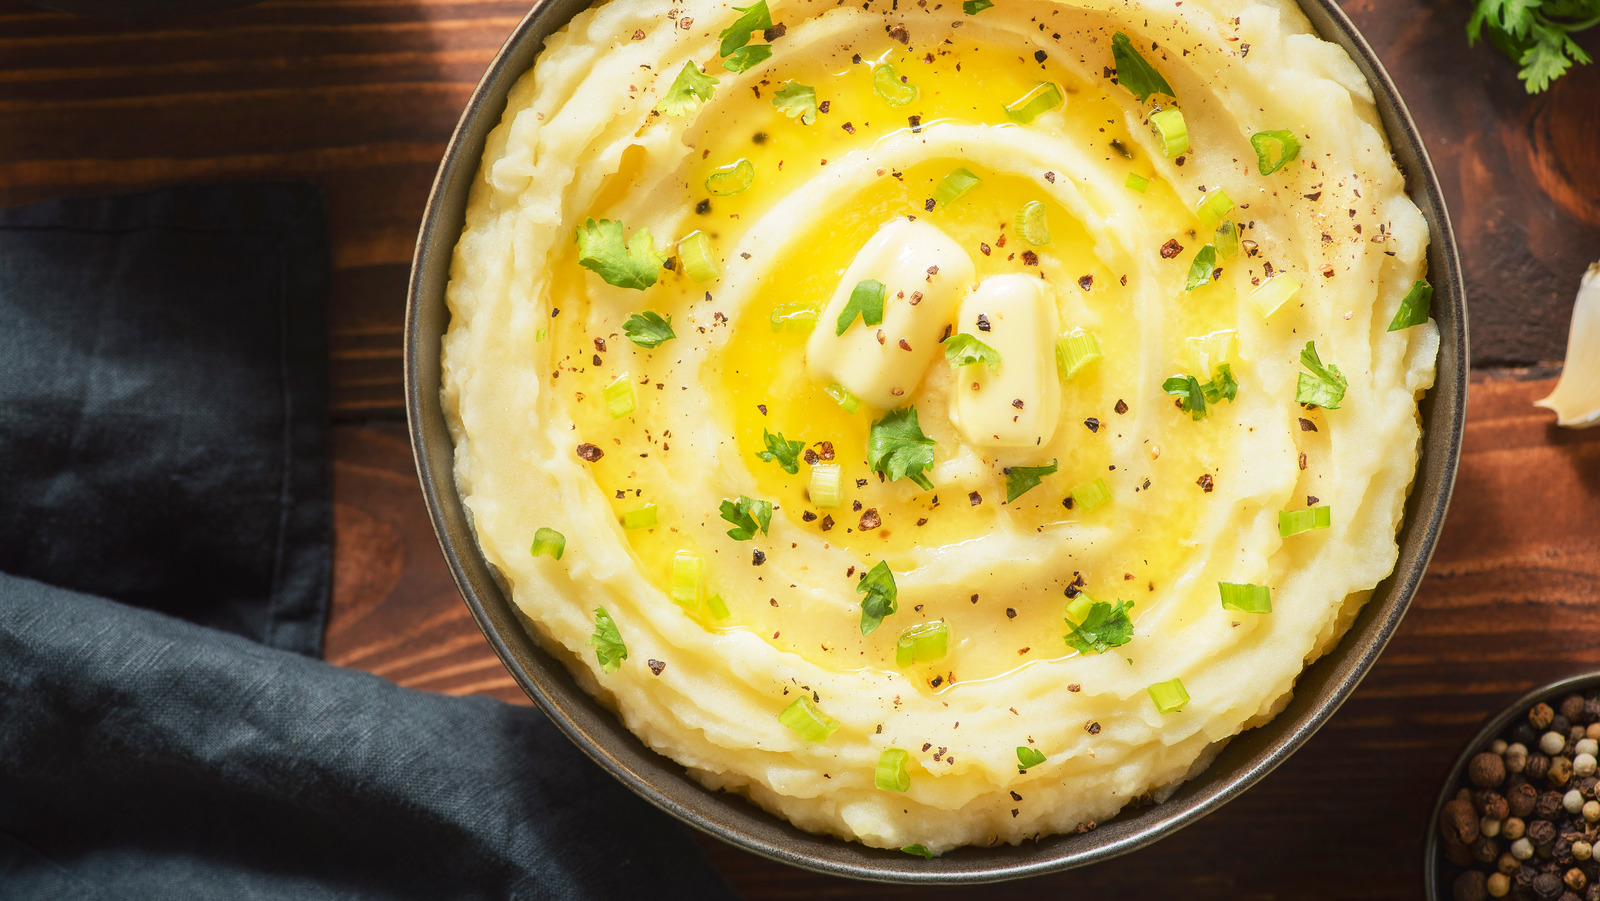 https://www.thedailymeal.com/img/gallery/why-you-should-never-make-mashed-potatoes-in-a-food-processor/l-intro-1670513479.jpg